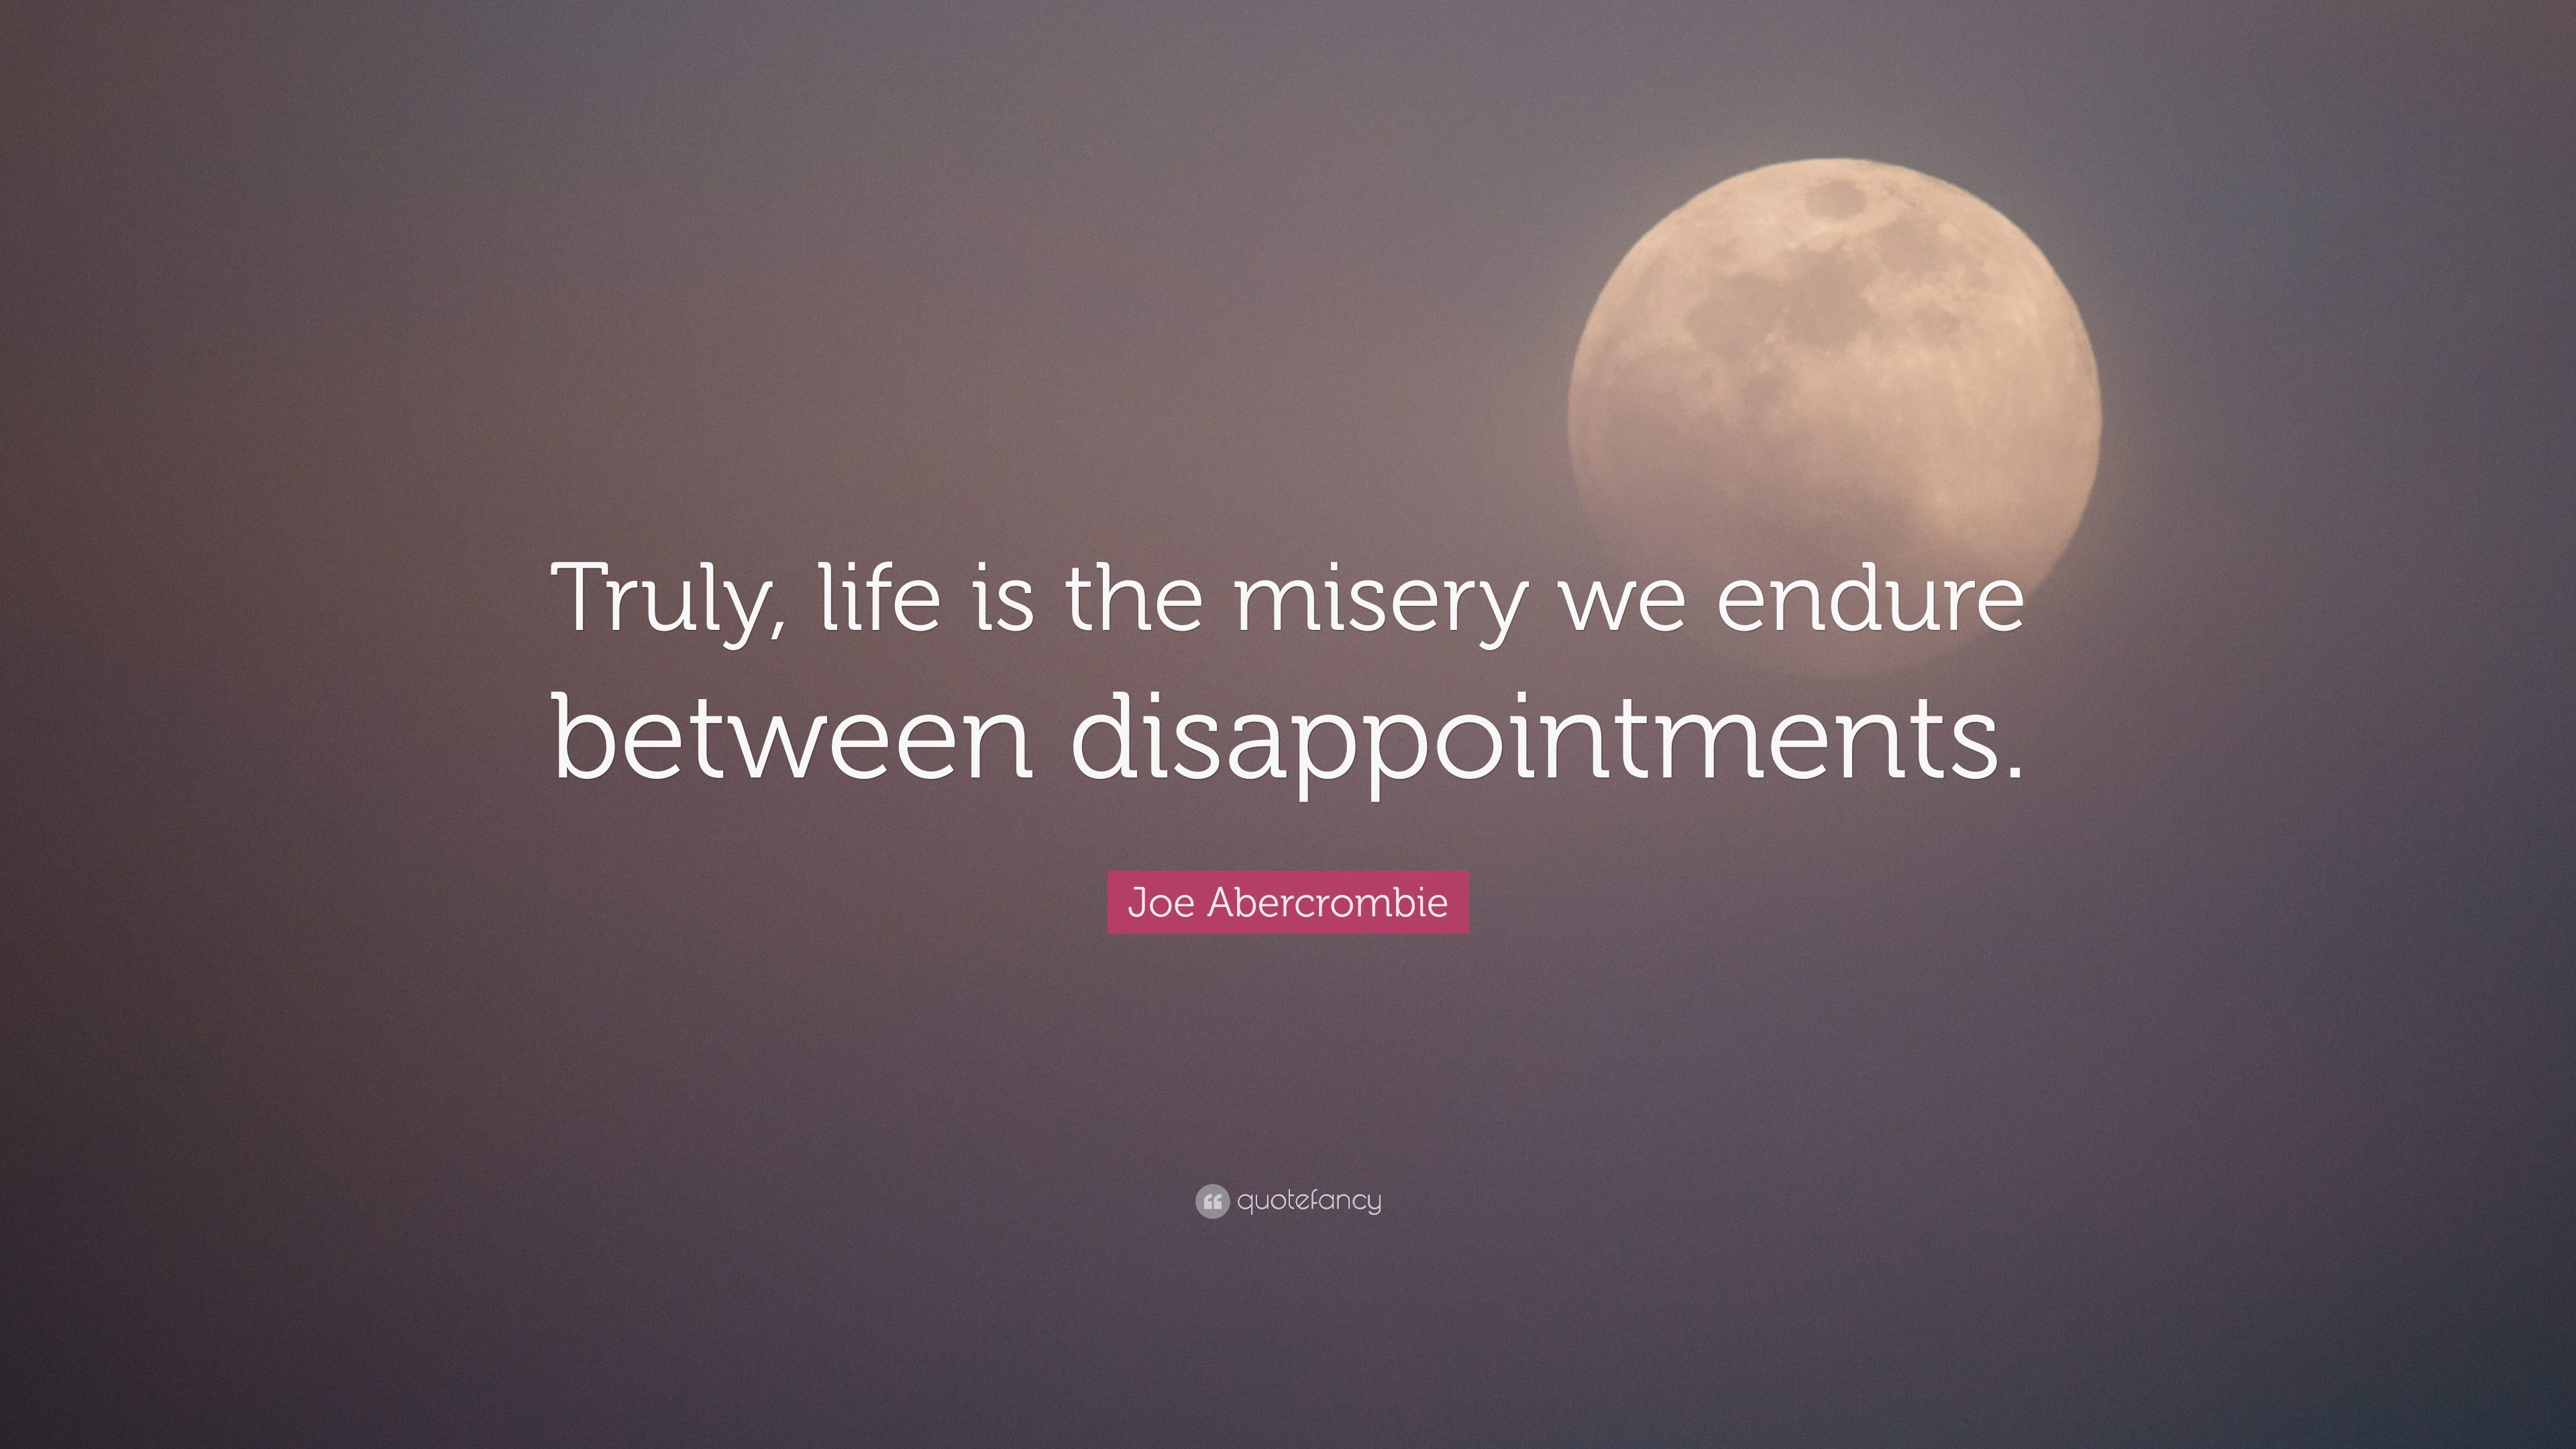 3840x2160 Joe Abercrombie Quote: “Truly, life is the misery we endure between  disappointments.